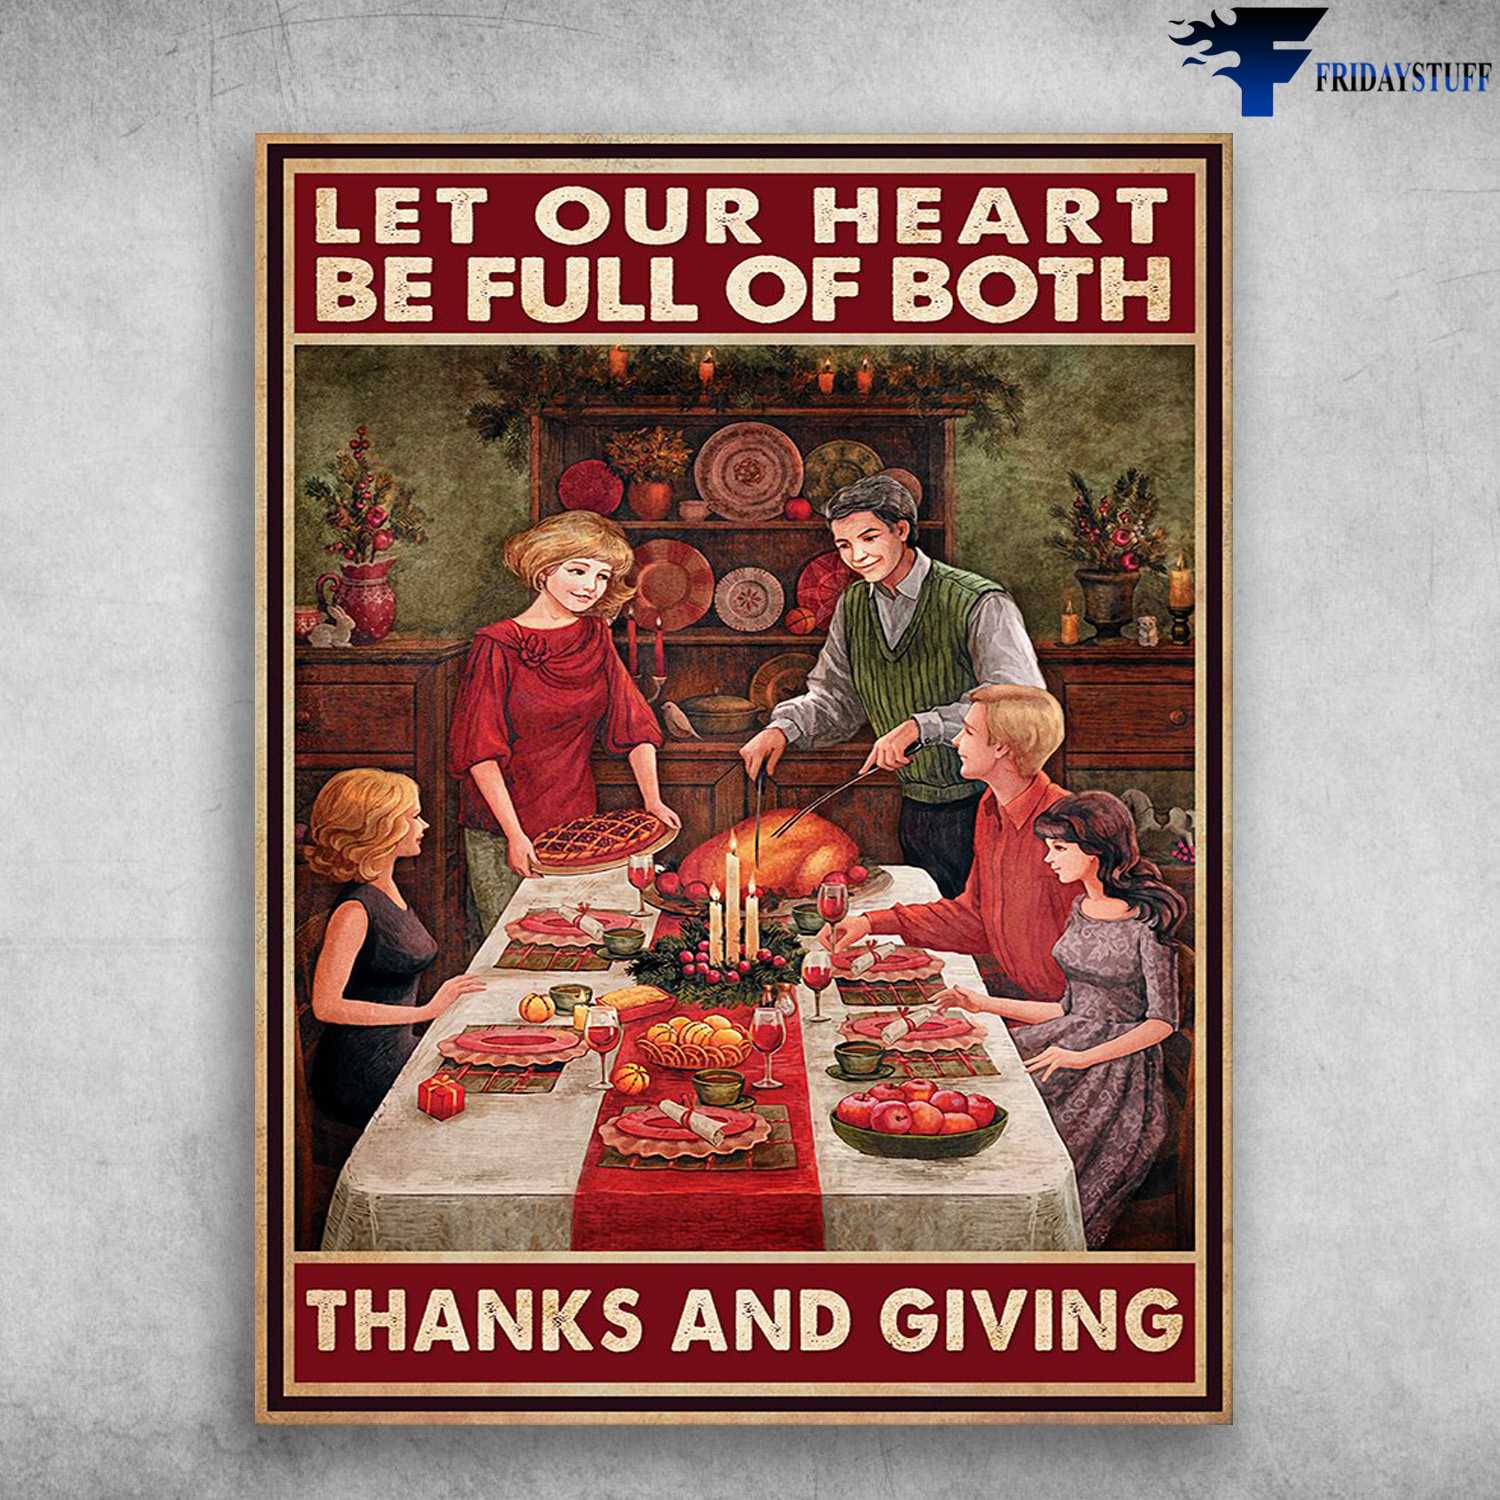 Thanksgiving Poster, Family's Gift - Let Our Heart Be Full Of Both, Thanks And Giving